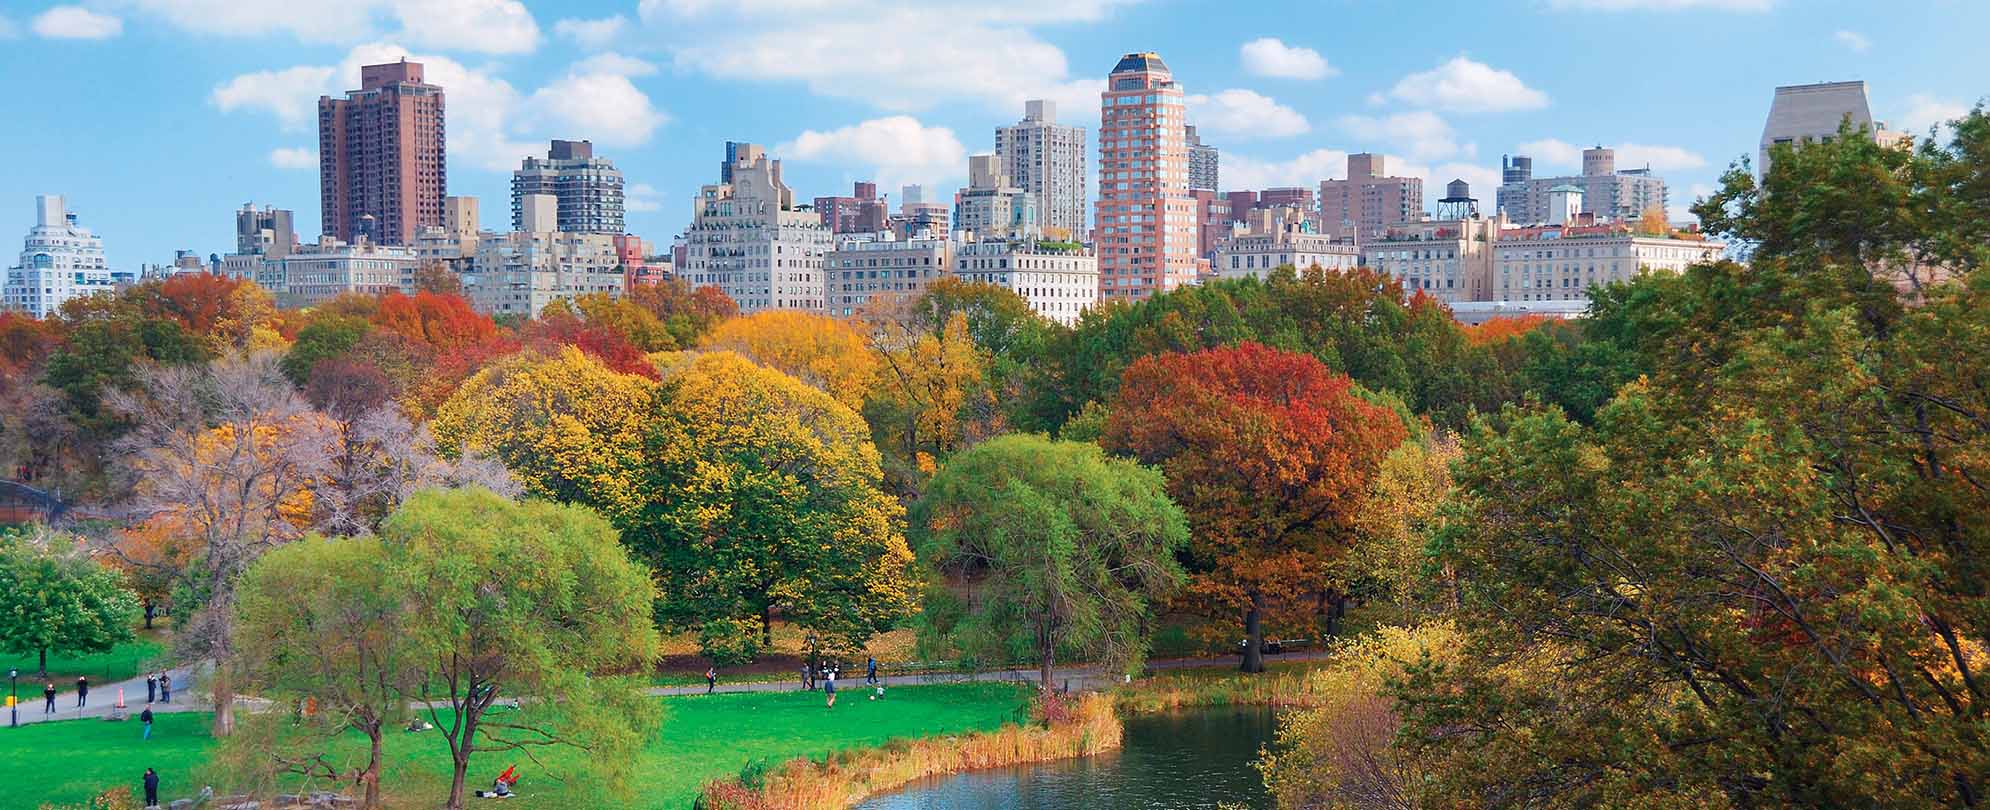 Central Park in New York City during fall.